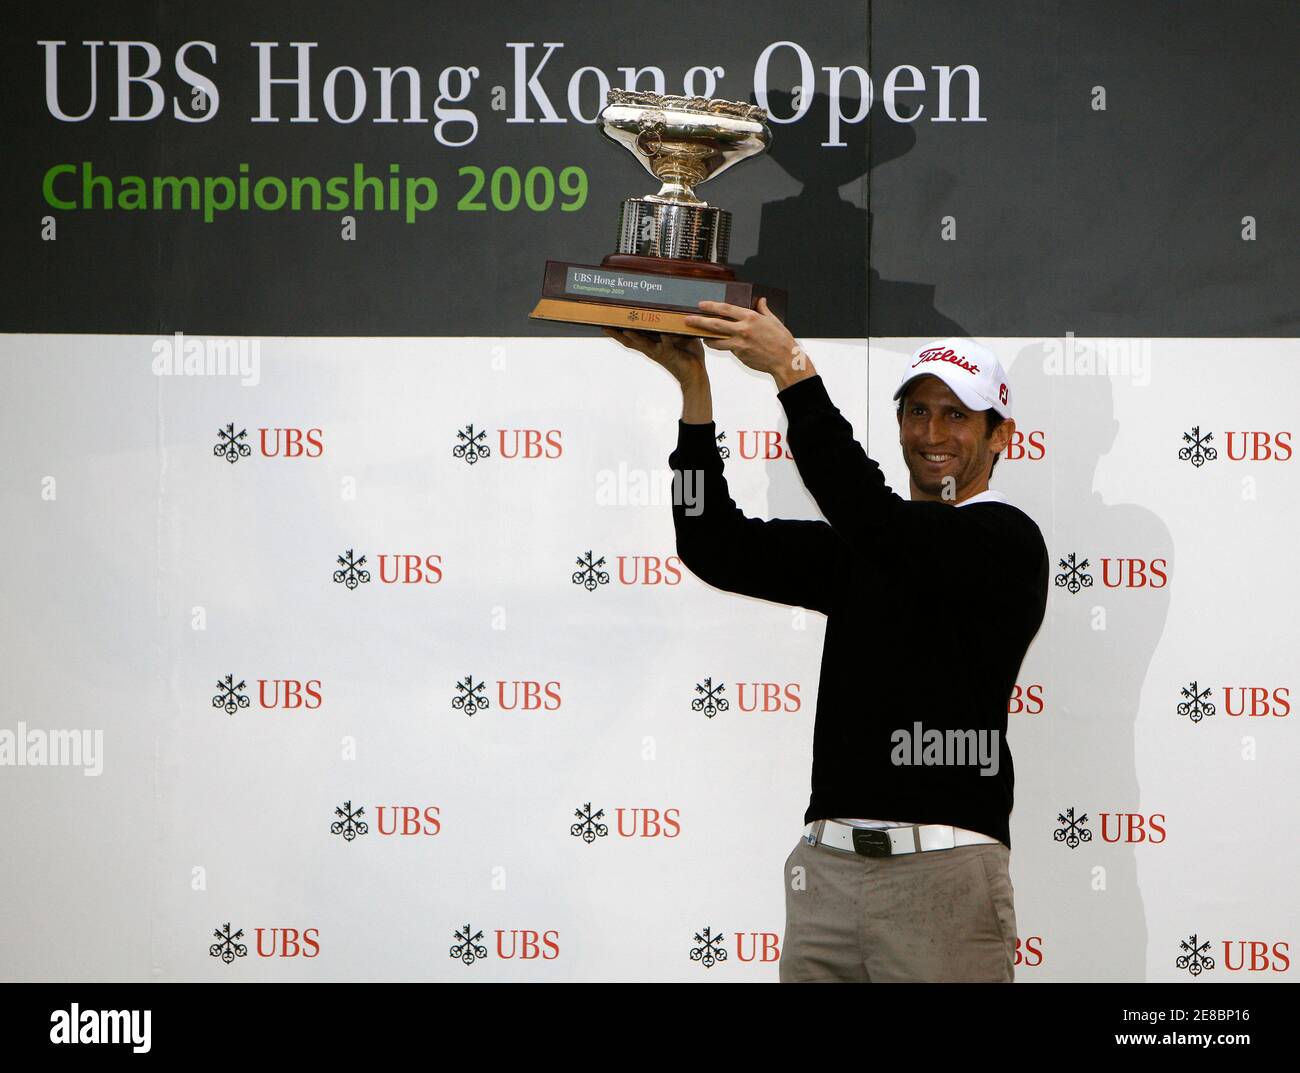 Gregory Bourdy of France celebrates with the winner's trophy after winning the Hong Kong Open golf tournament November 15, 2009.     REUTERS/Tyrone Siu    (CHINA SPORT GOLF) Stock Photo